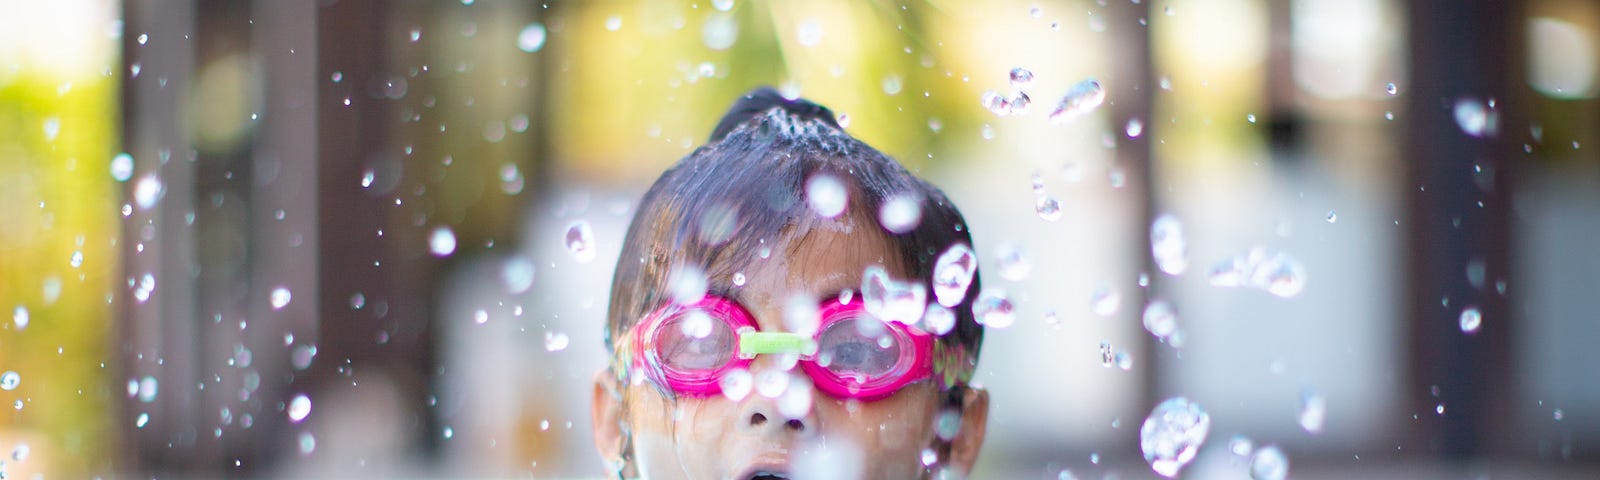 A young girl splashing in a pool.